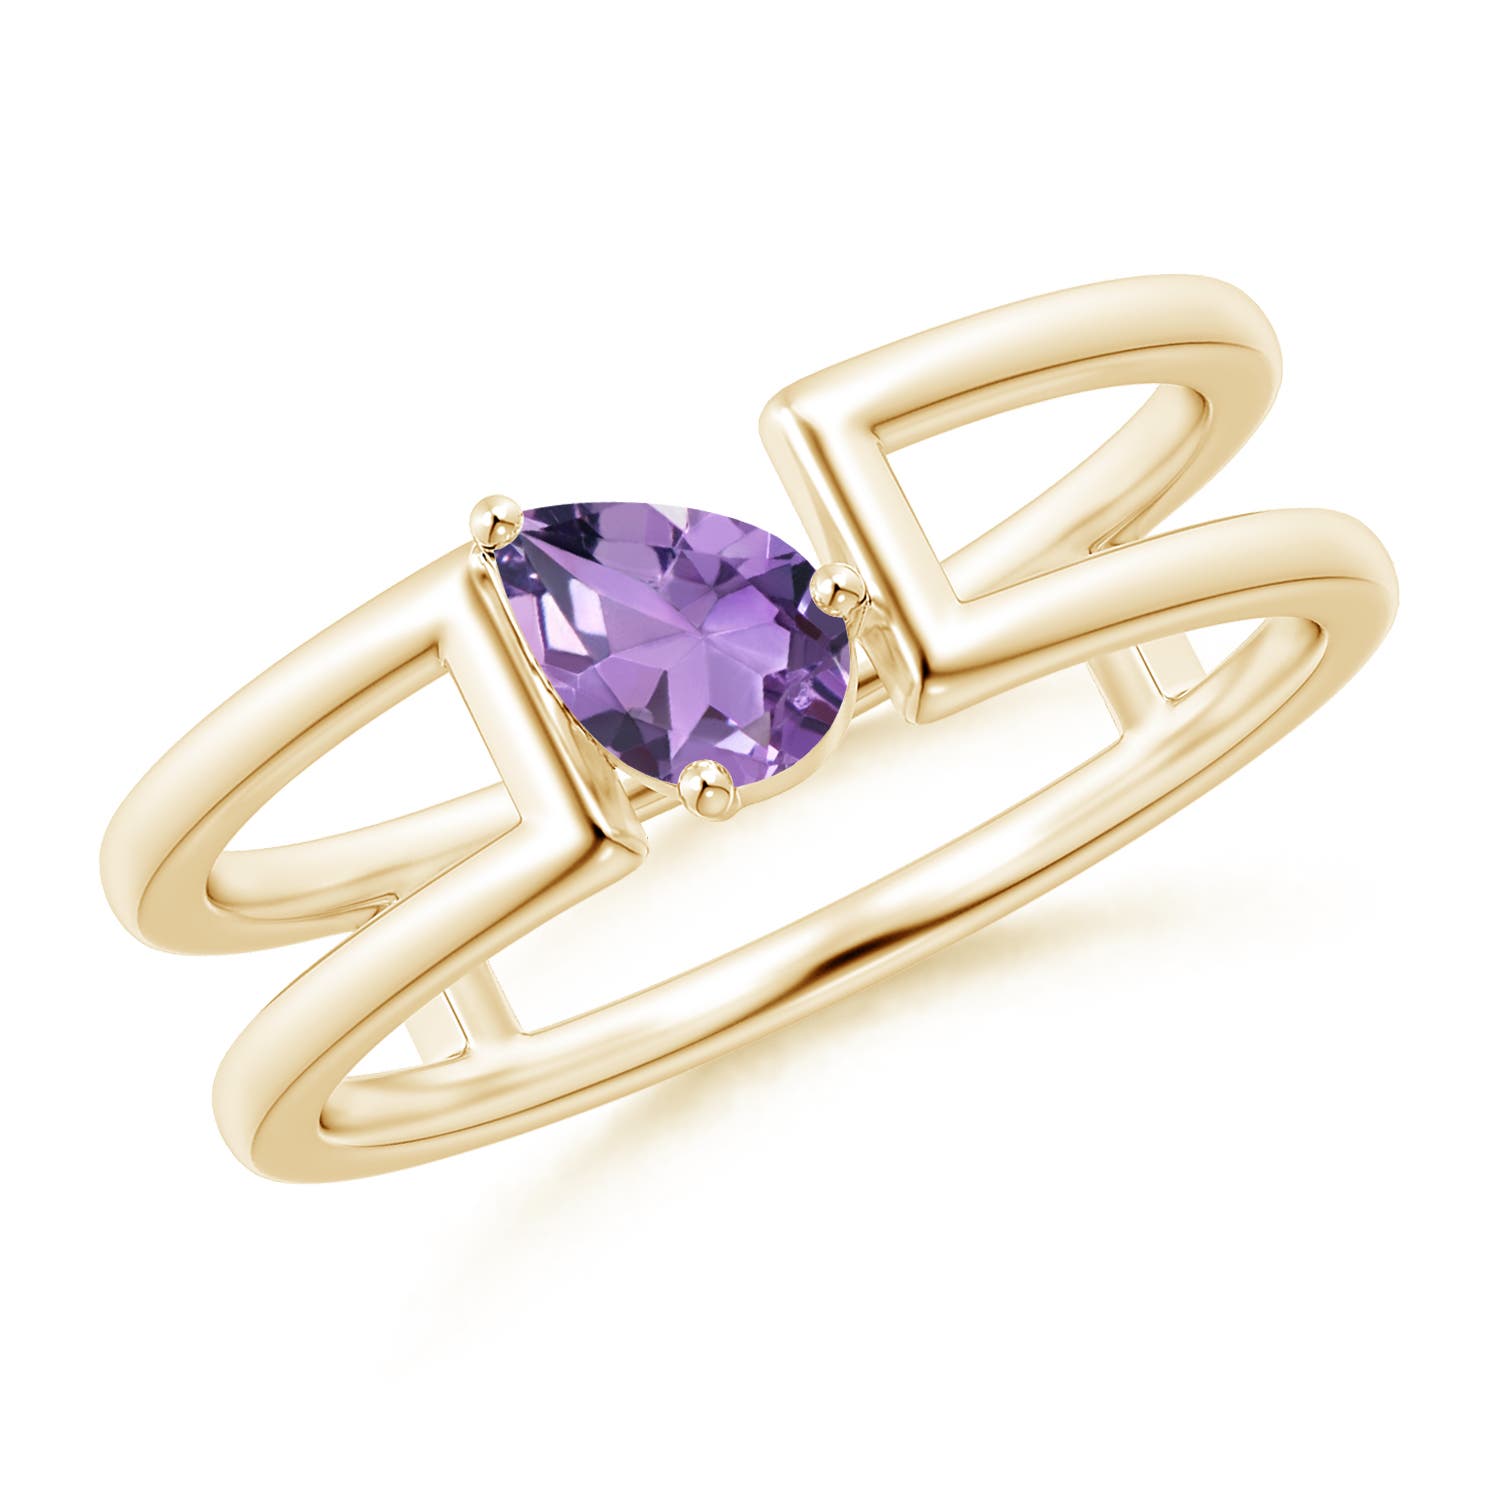 A - Amethyst / 0.33 CT / 14 KT Yellow Gold